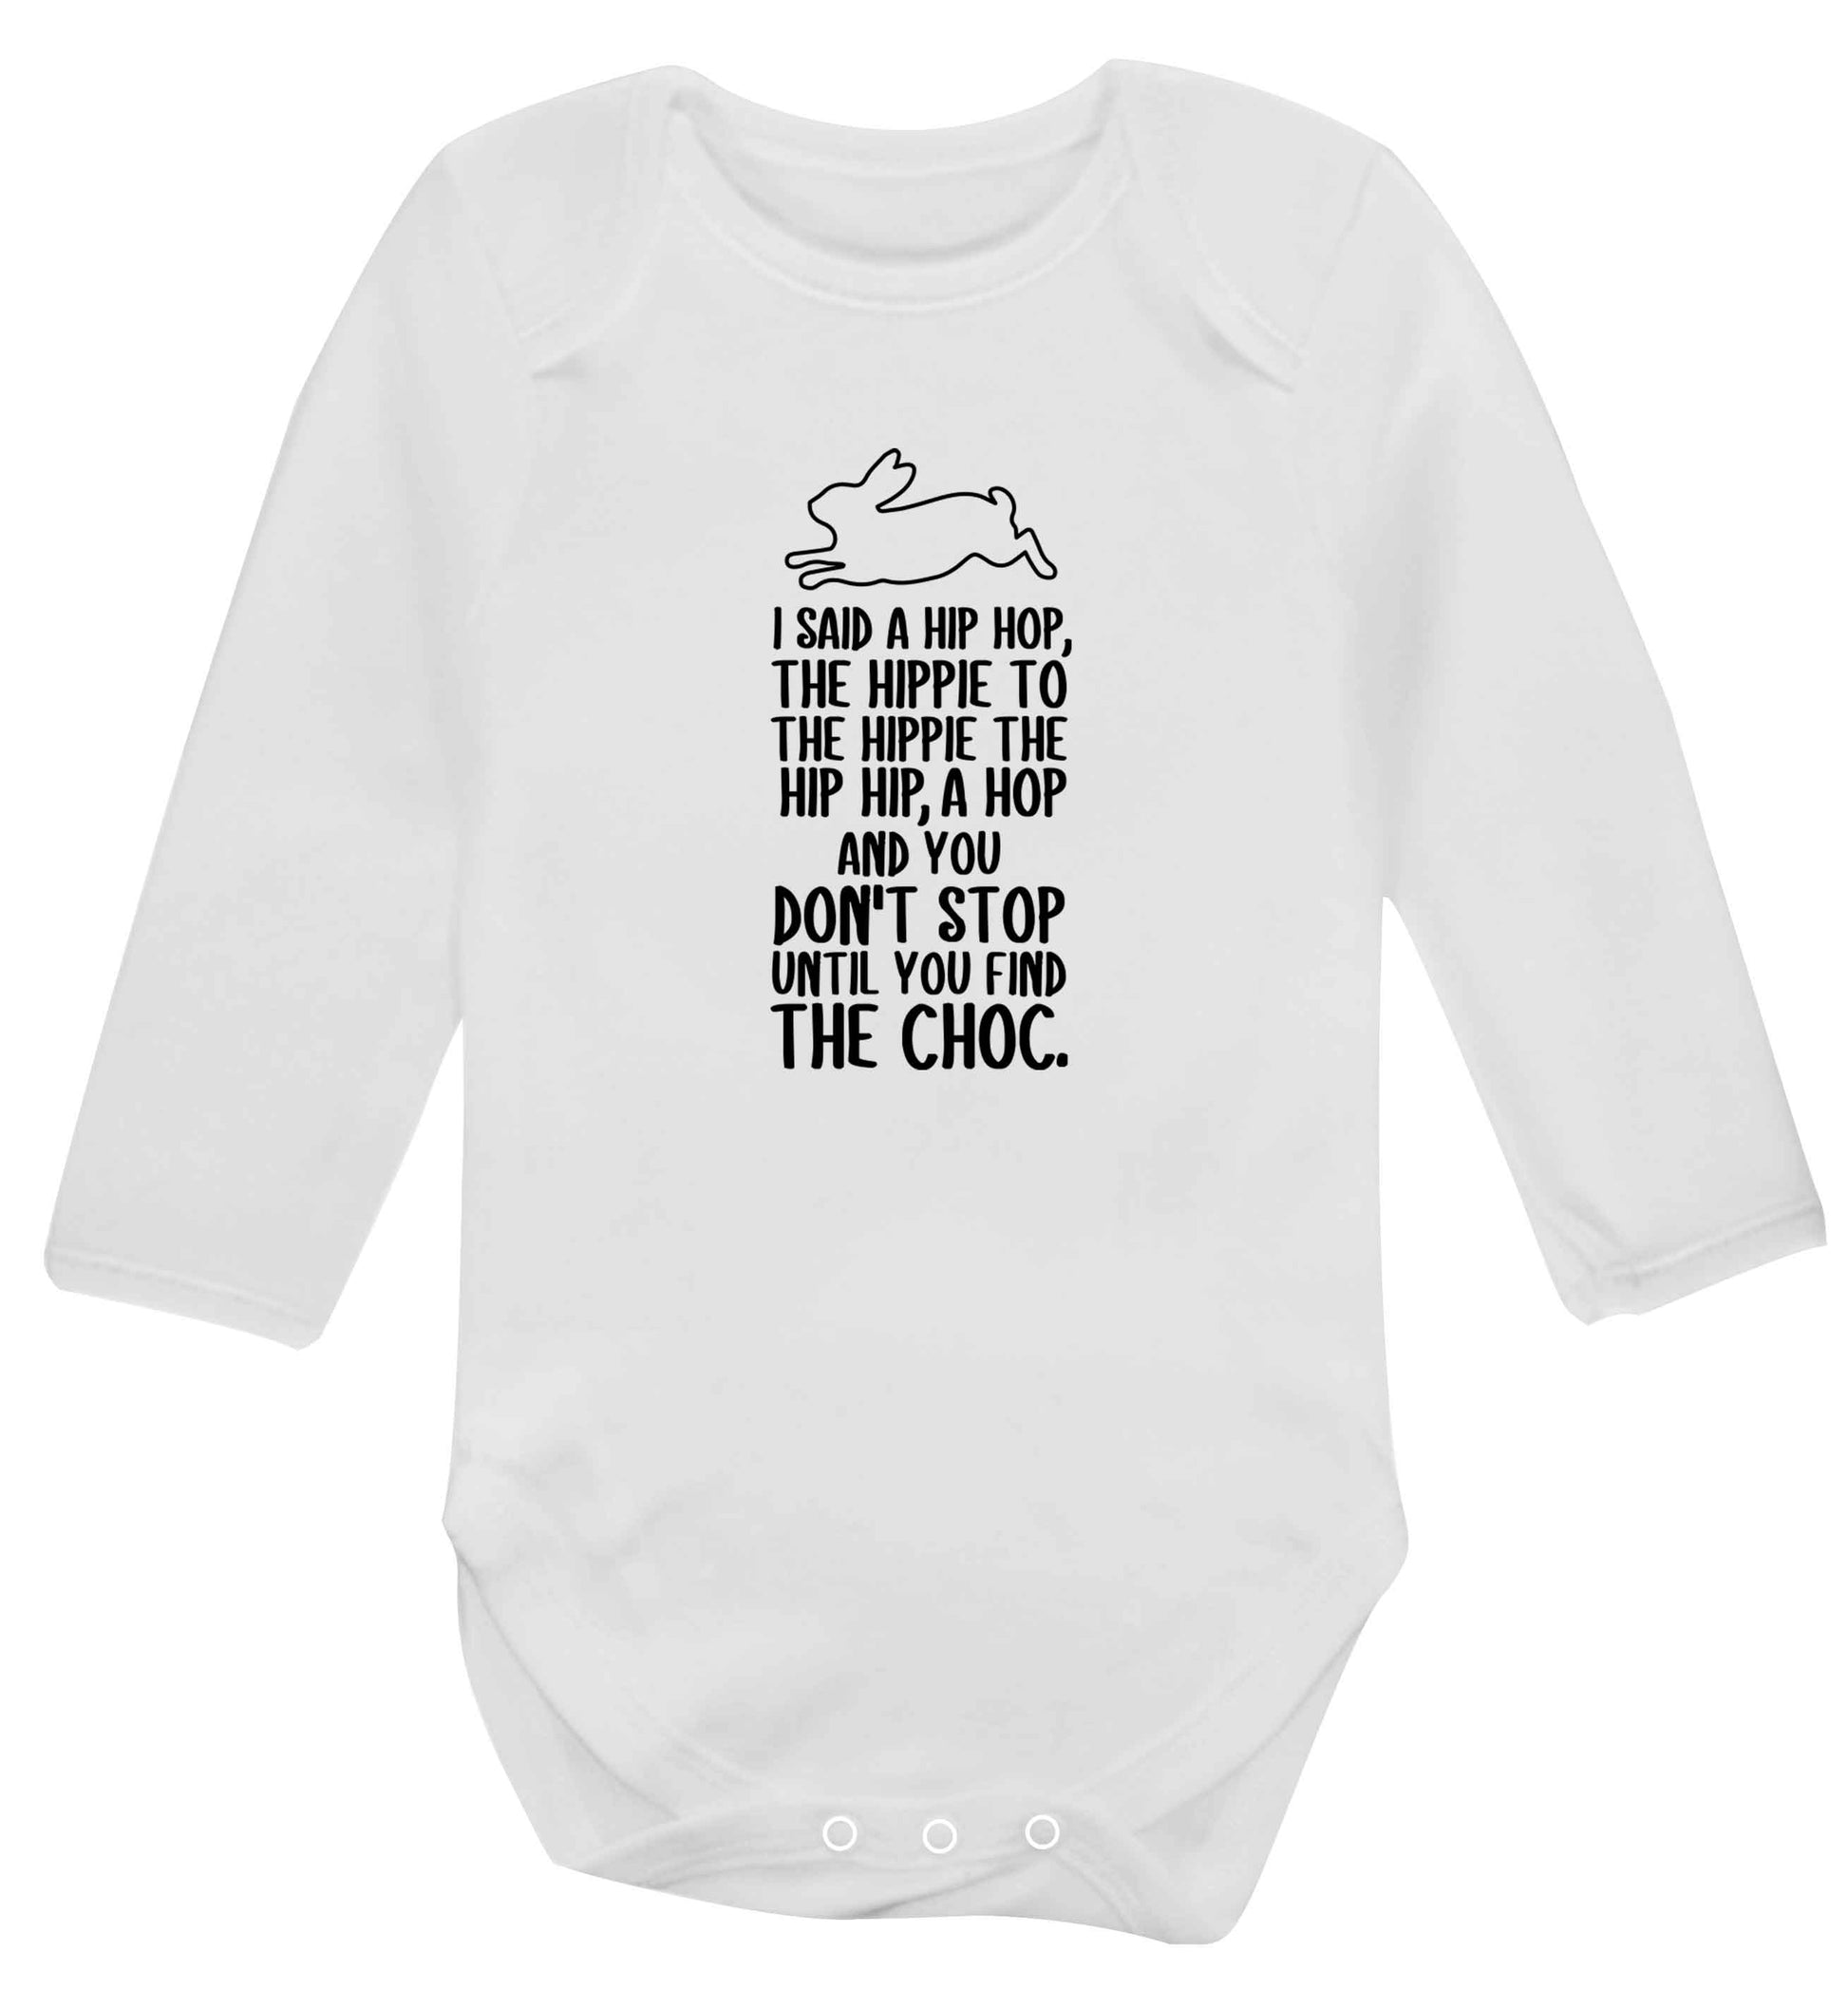 Don't stop until you find the choc baby vest long sleeved white 6-12 months